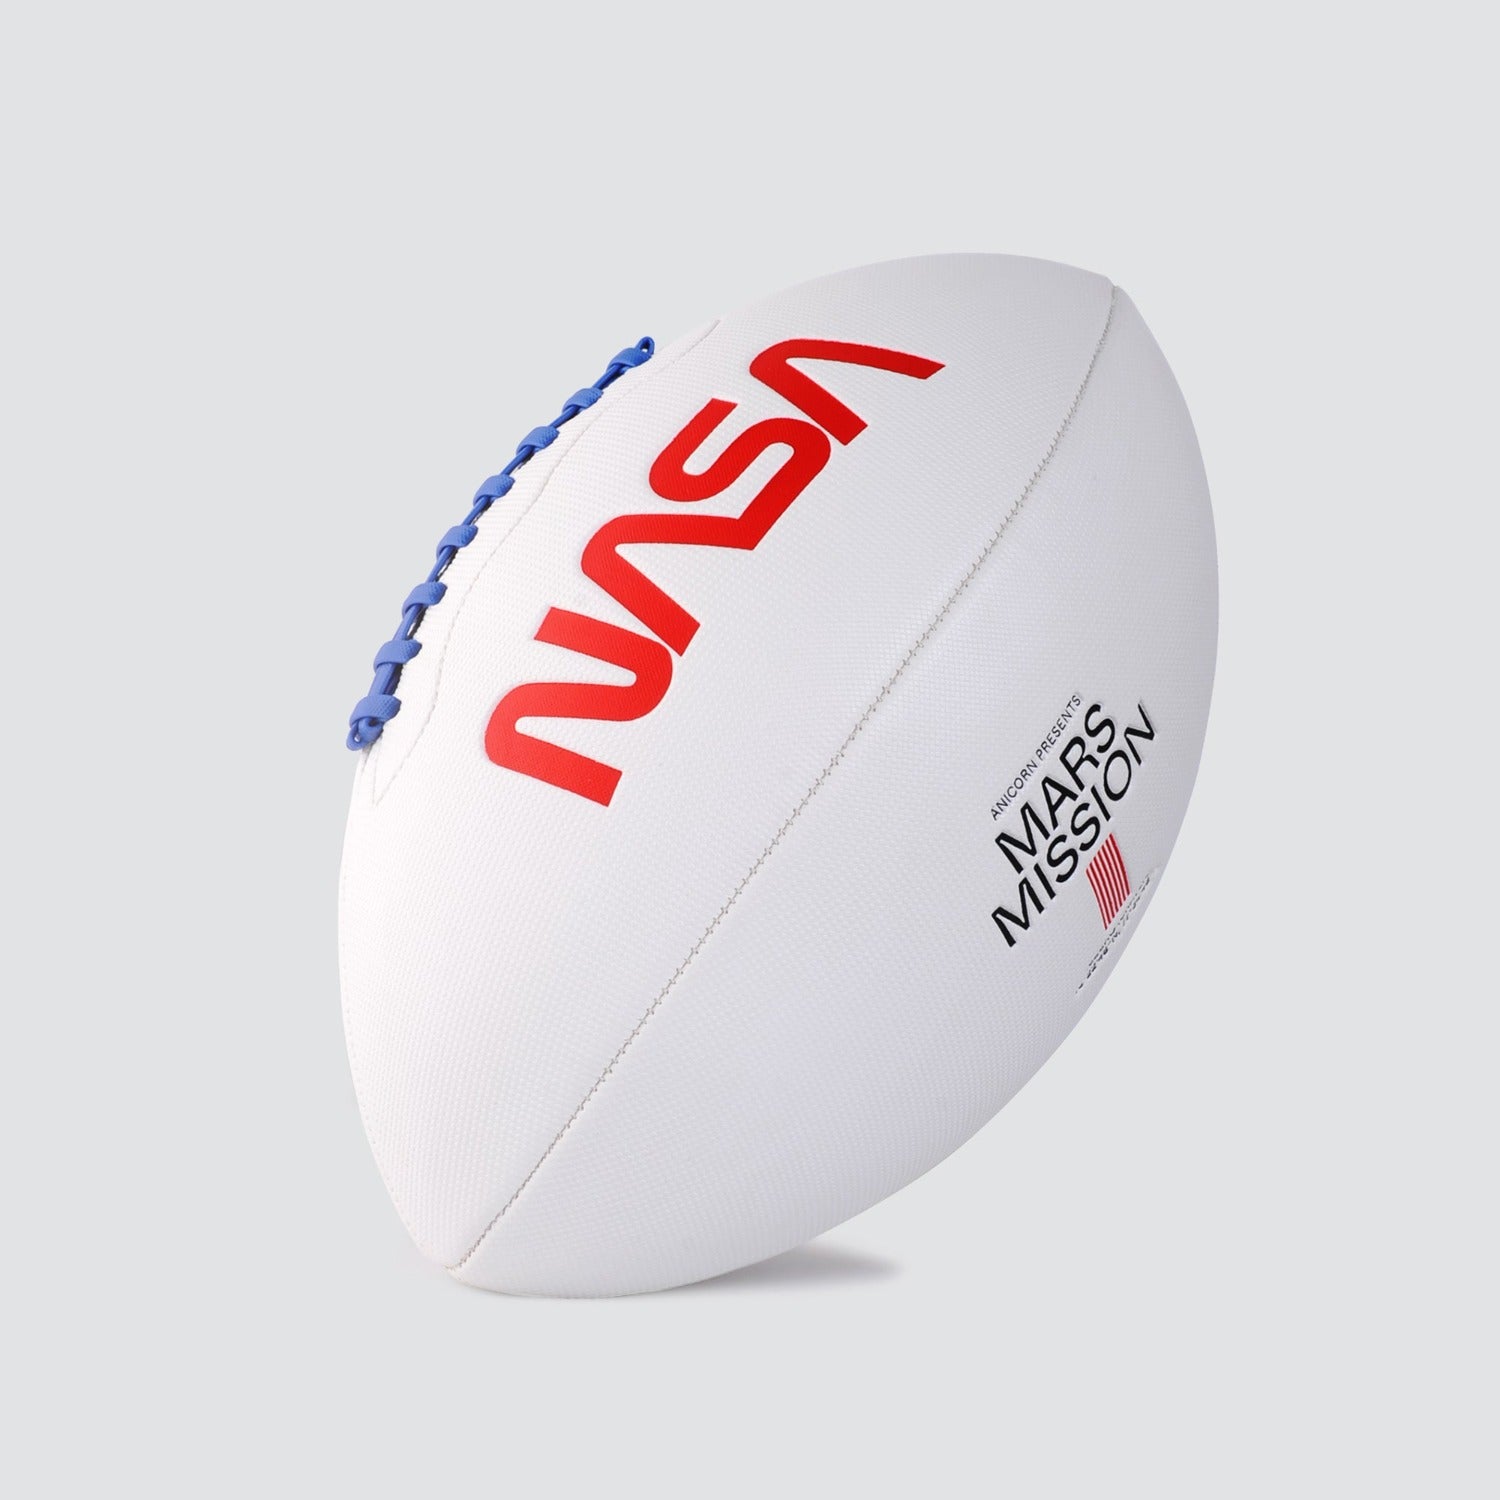 Stamped with NASA worm logo, Jezero Crater coordinates and made with exclusive microfiber composite leather, The Mars Field football is the one and only NASA edition of its kind.